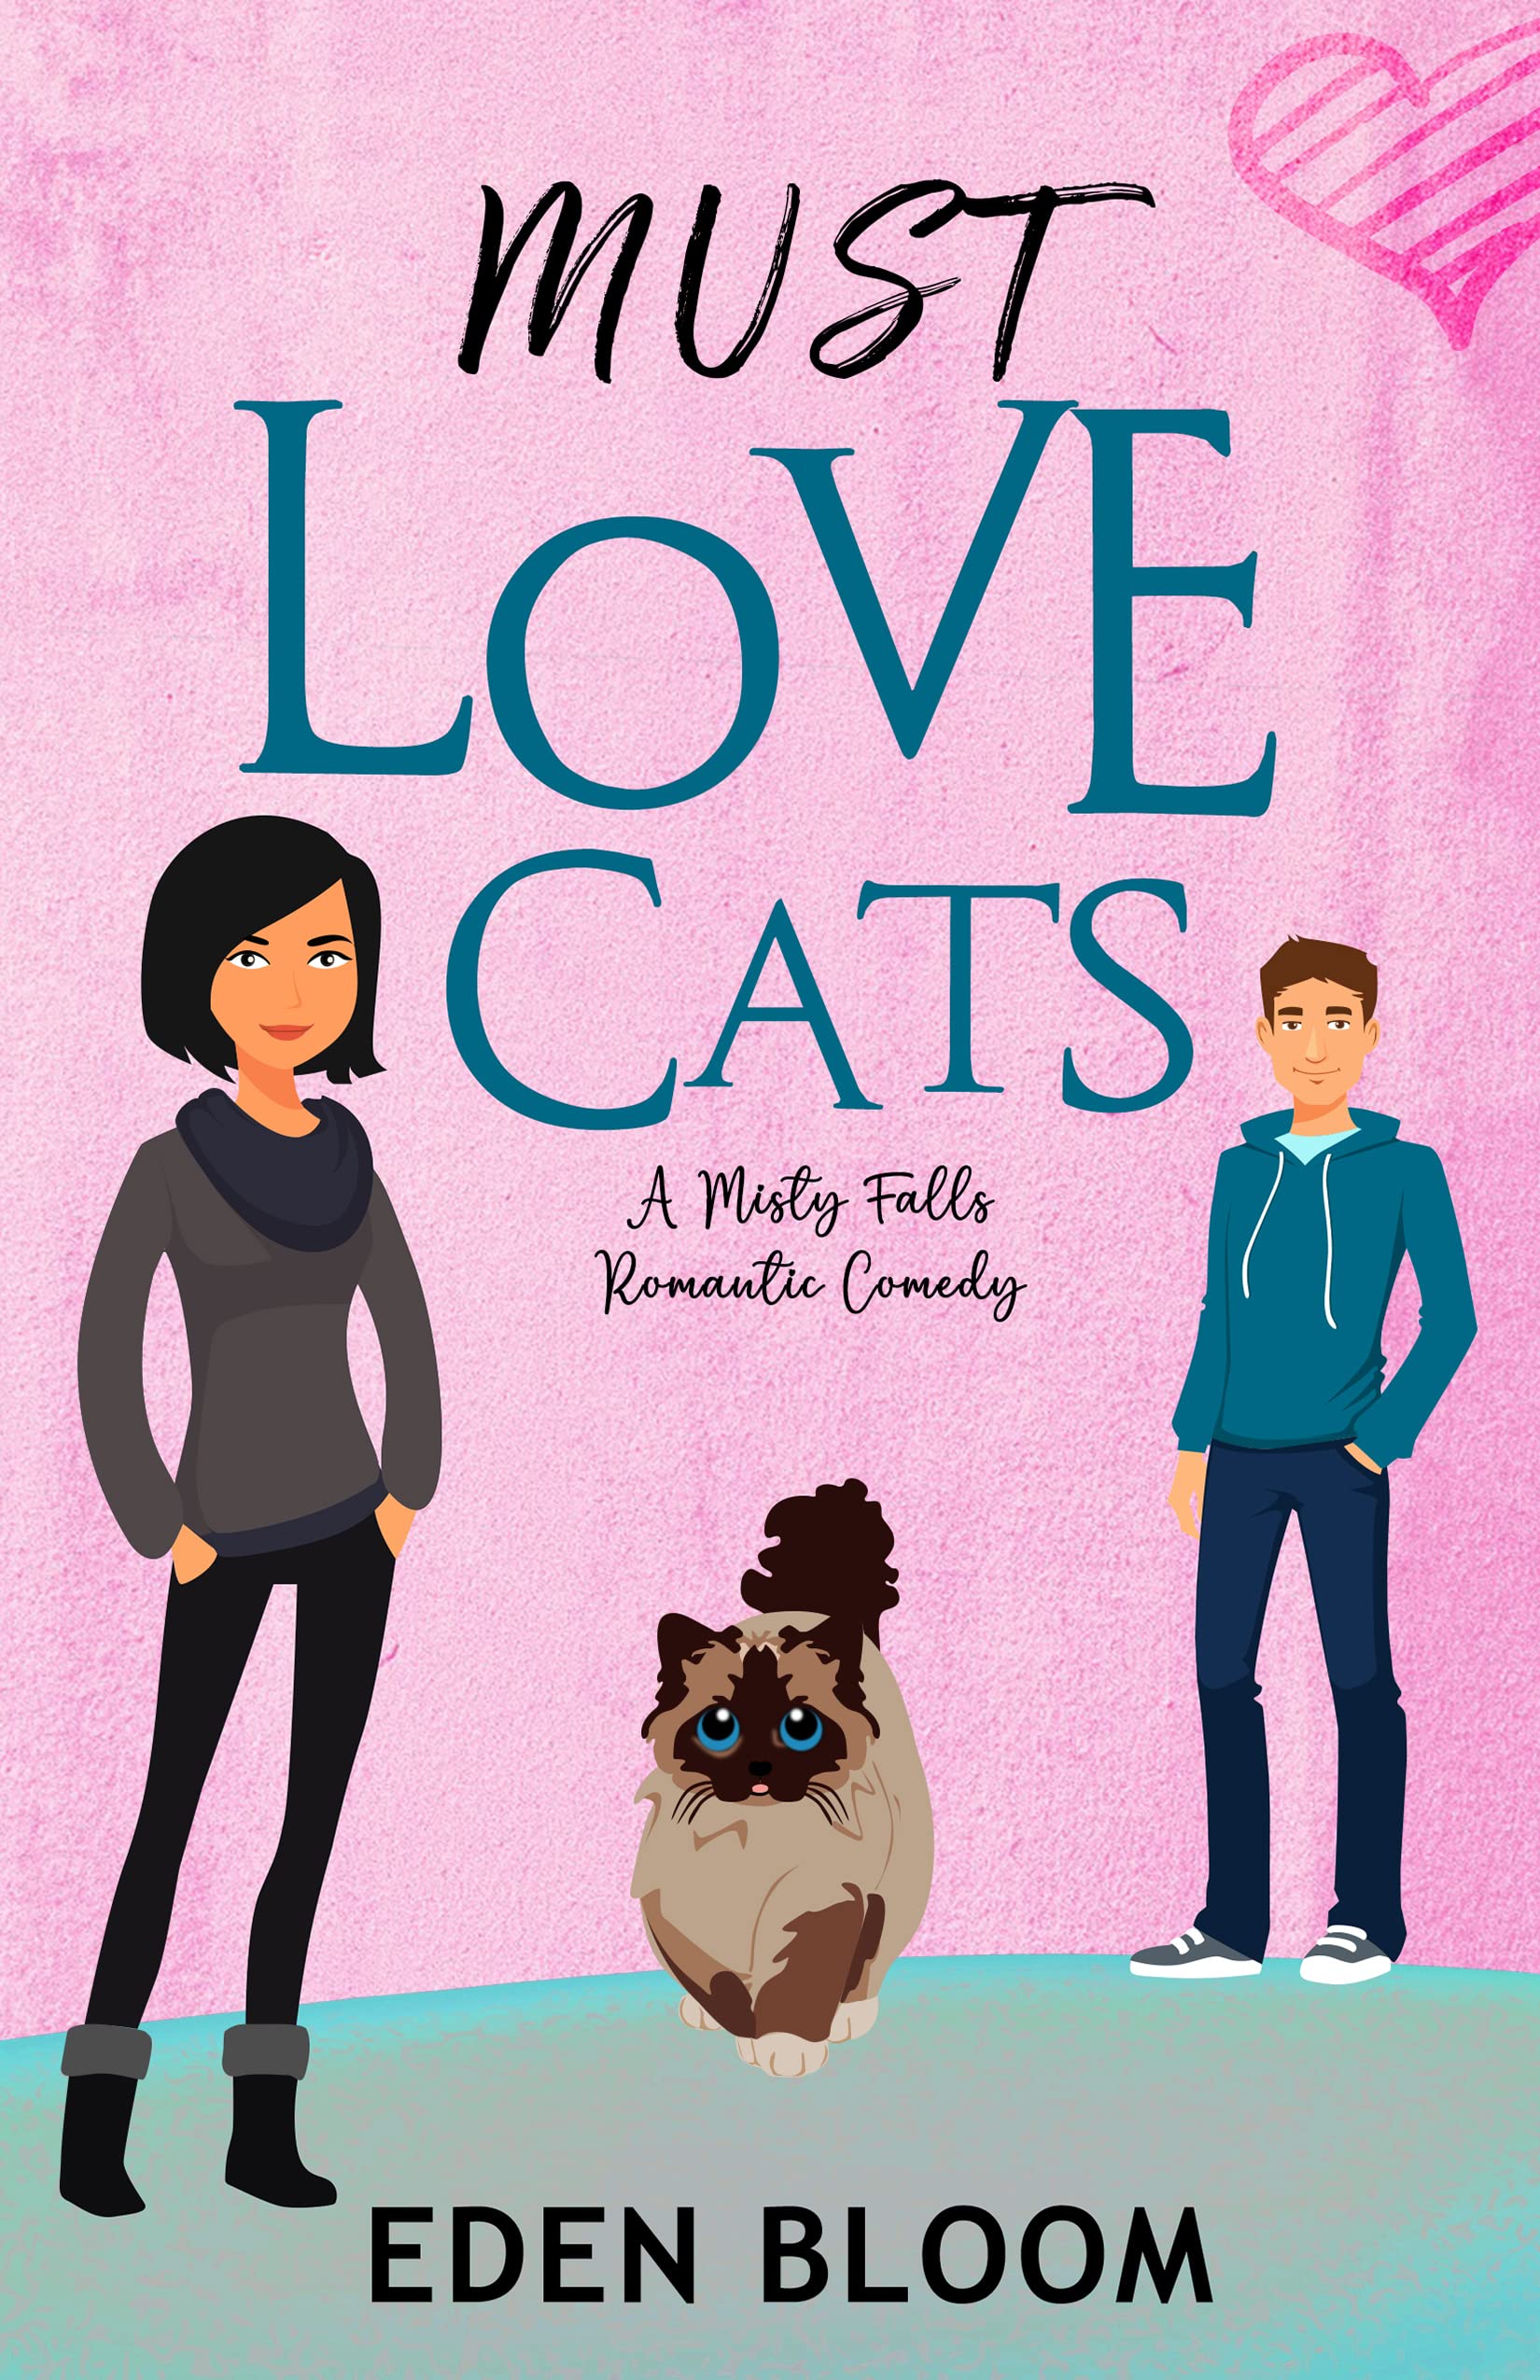 Must Love Cats by Eden Bloom PDF Download